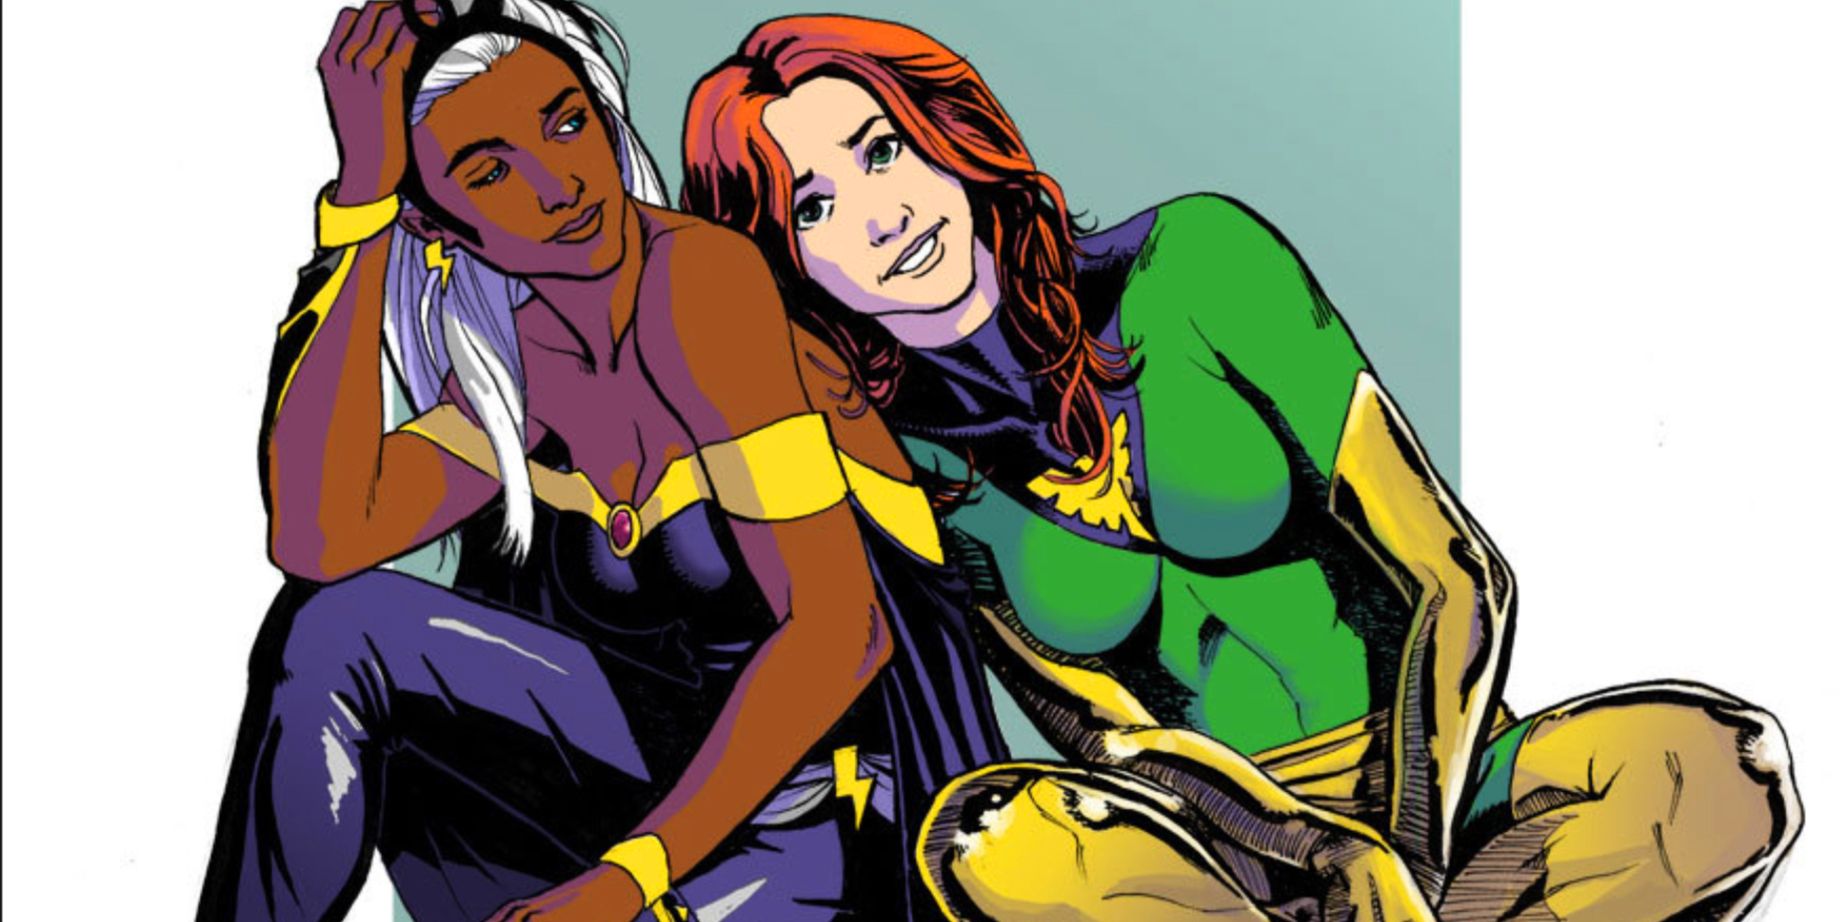 Jean Grey and Storm